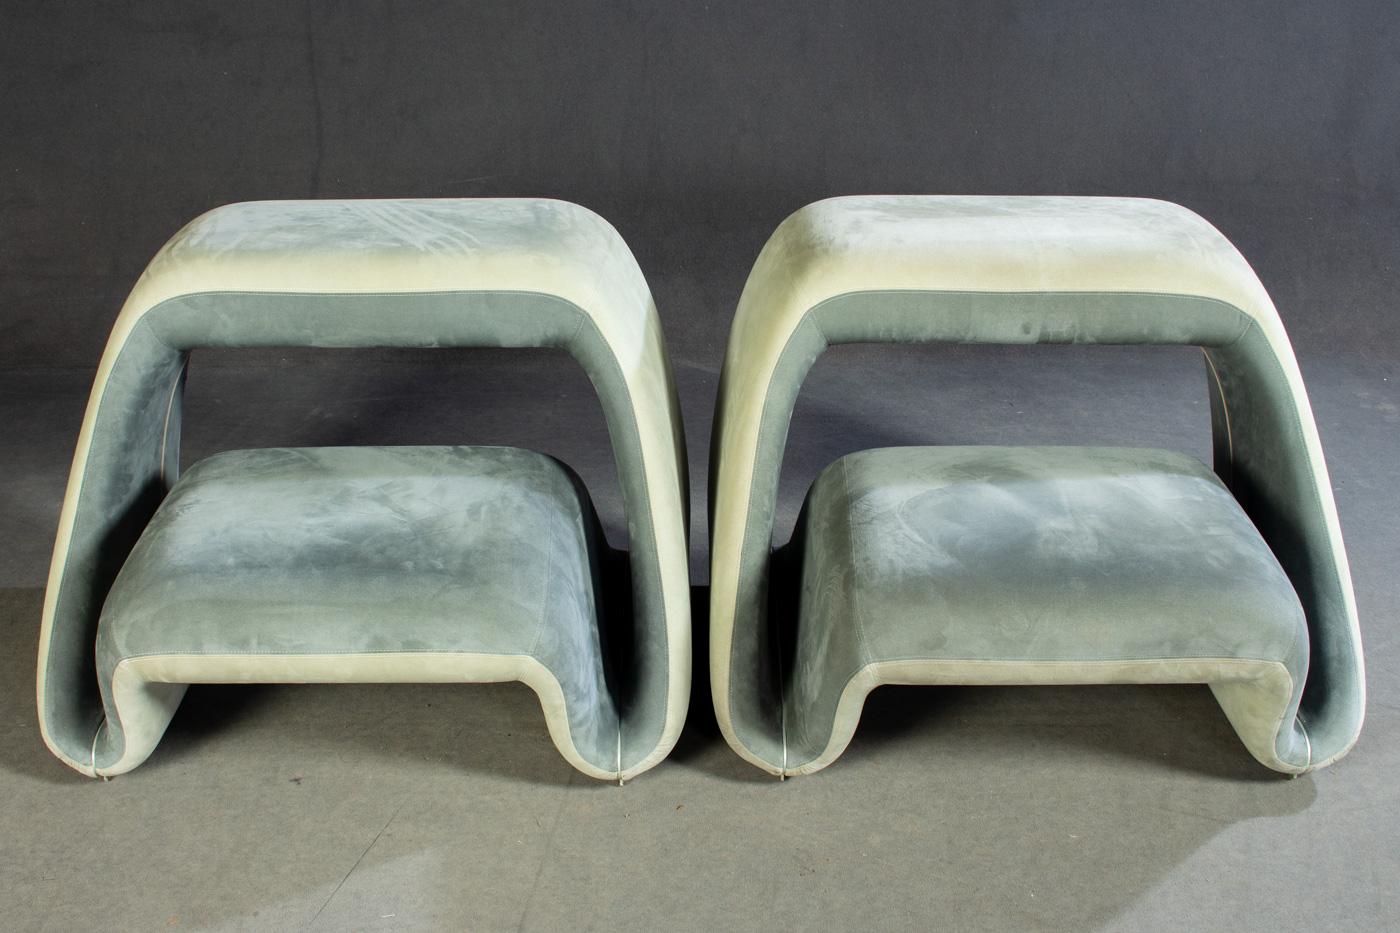 Pair of air sofa/lounge chairs by Fabio Novembre for Meritalia.
Frame of metal, U-shaped, padded with original velvet covers.
Marked with label. Wear and signs of age.
         